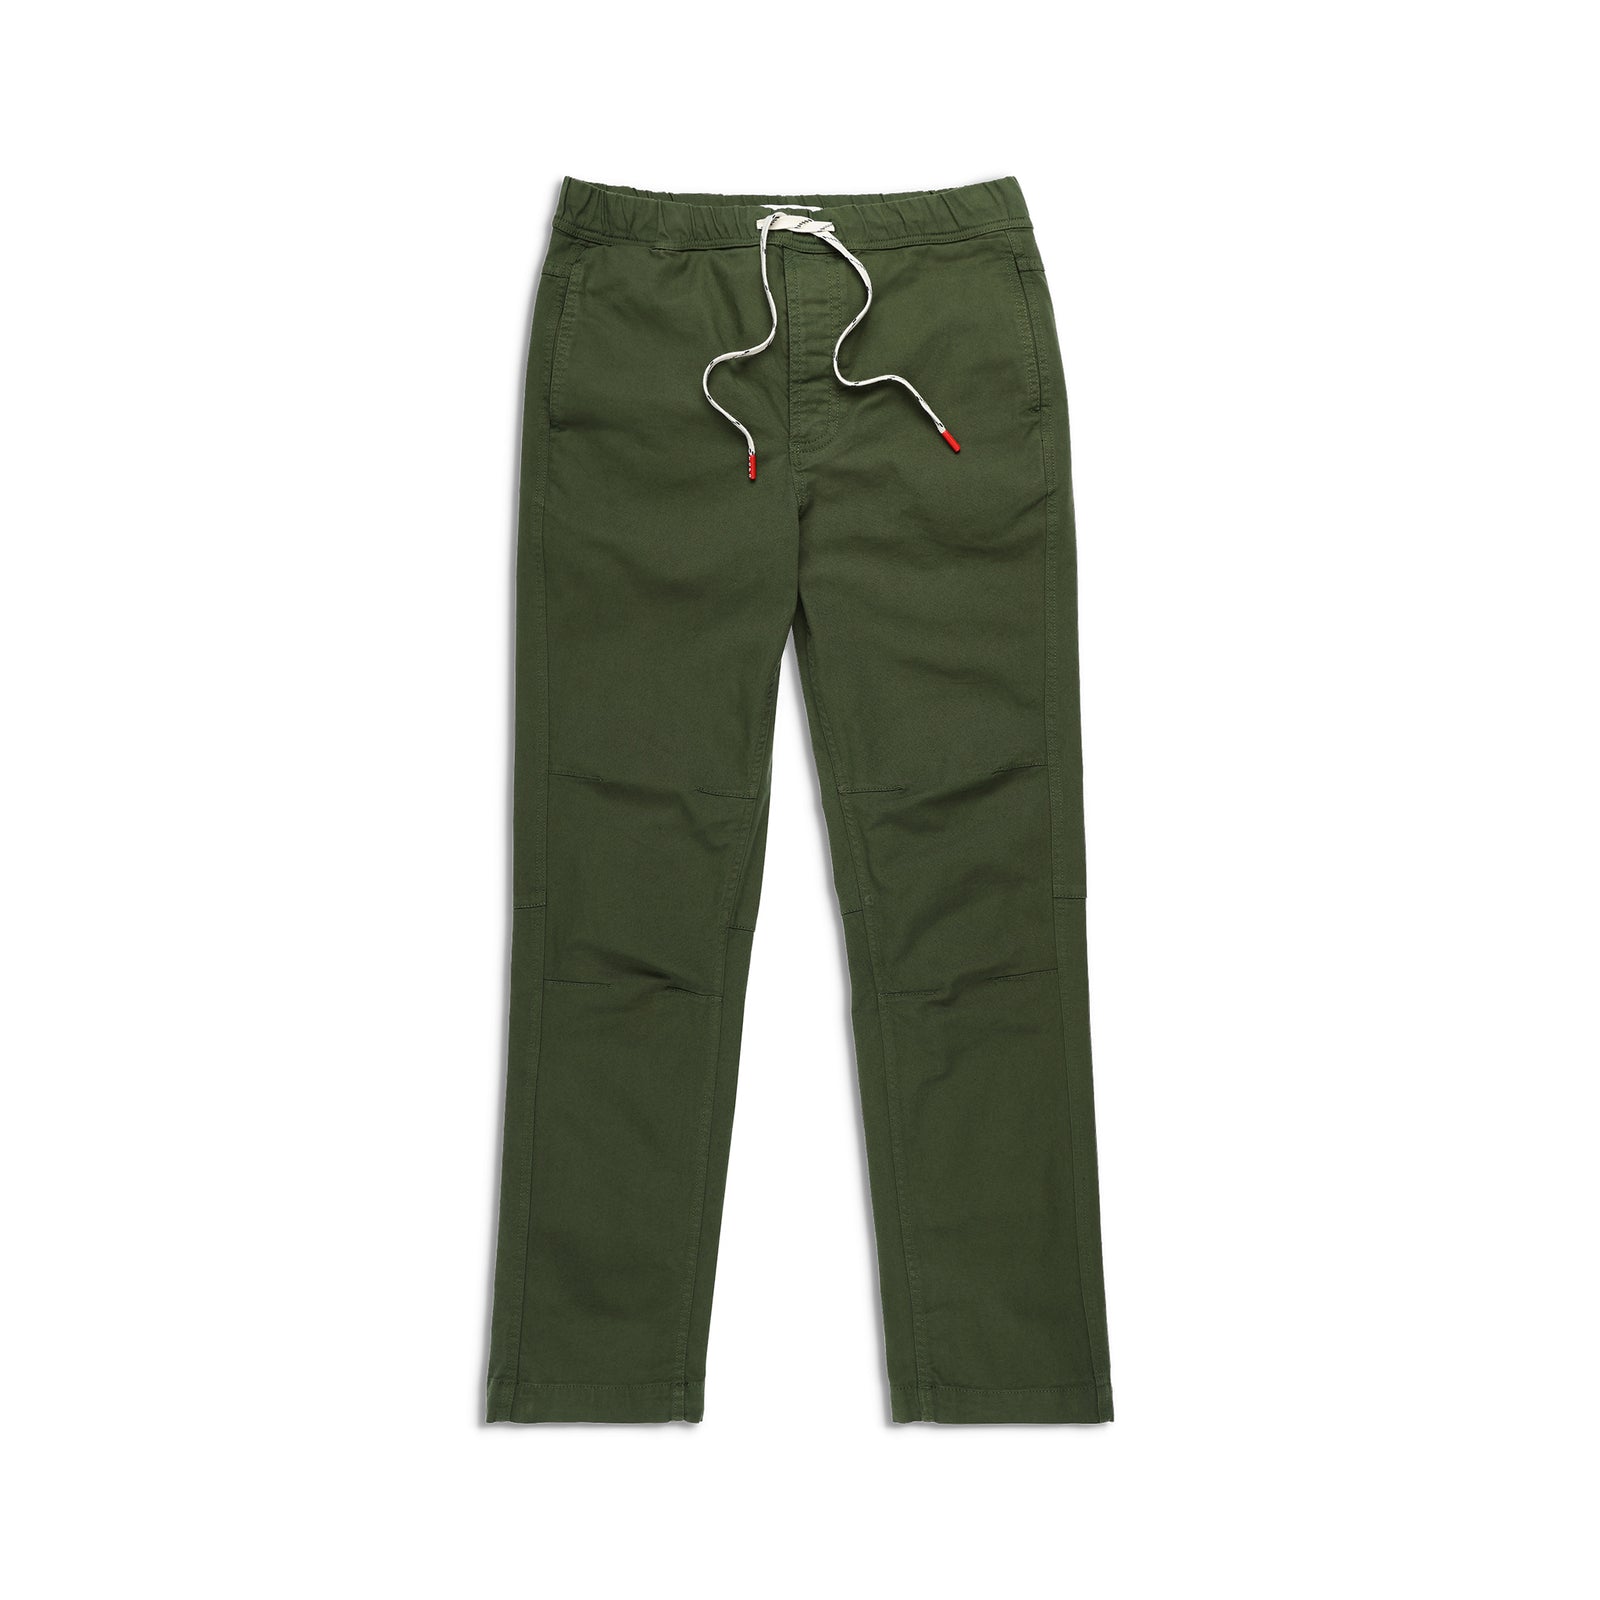 Front View of Topo Designs Dirt Pants Classic - Men's in "Olive"